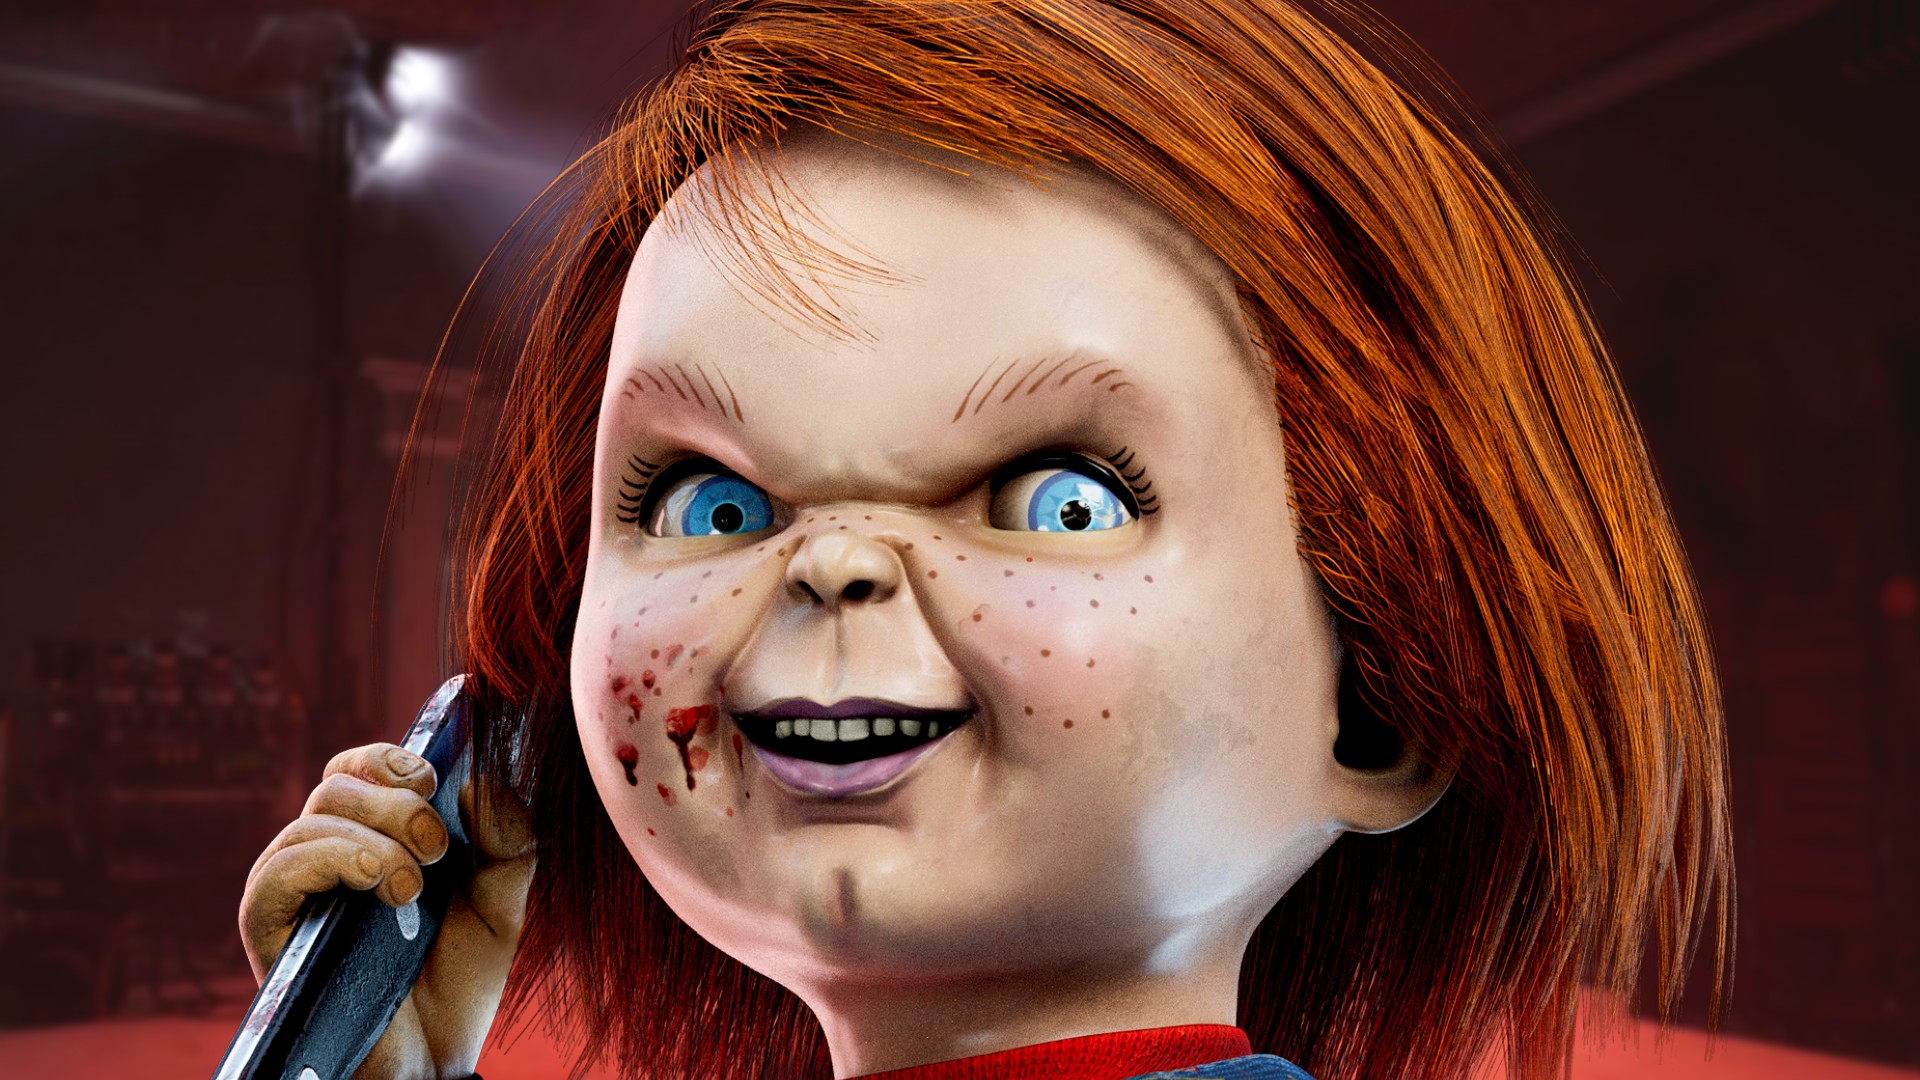 Next DBD update – When does Chucky come to Dead by Daylight?